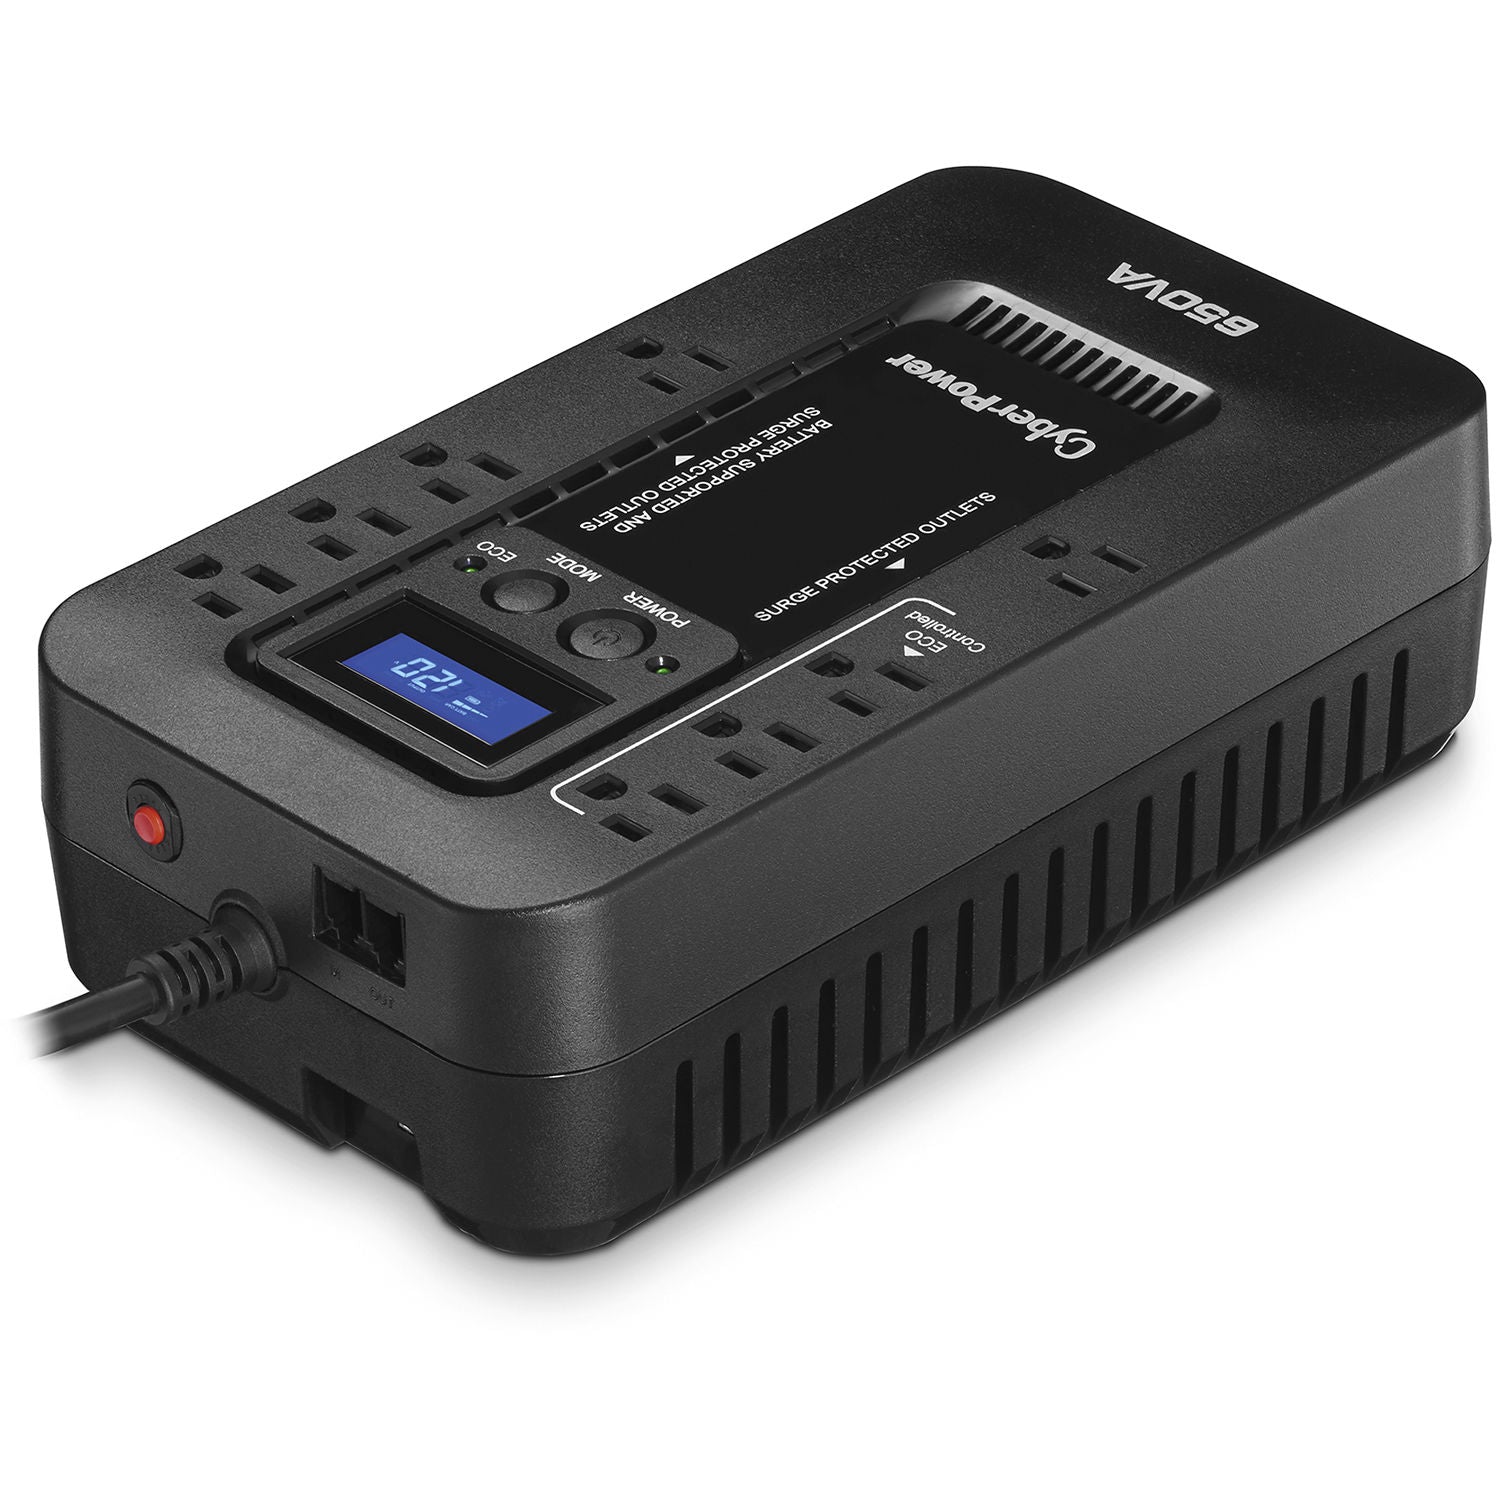 CyberPower EC650LCD-R 650VA/390W 8 Outlets ECO LCD UPS - New Battery Certified Refurbished